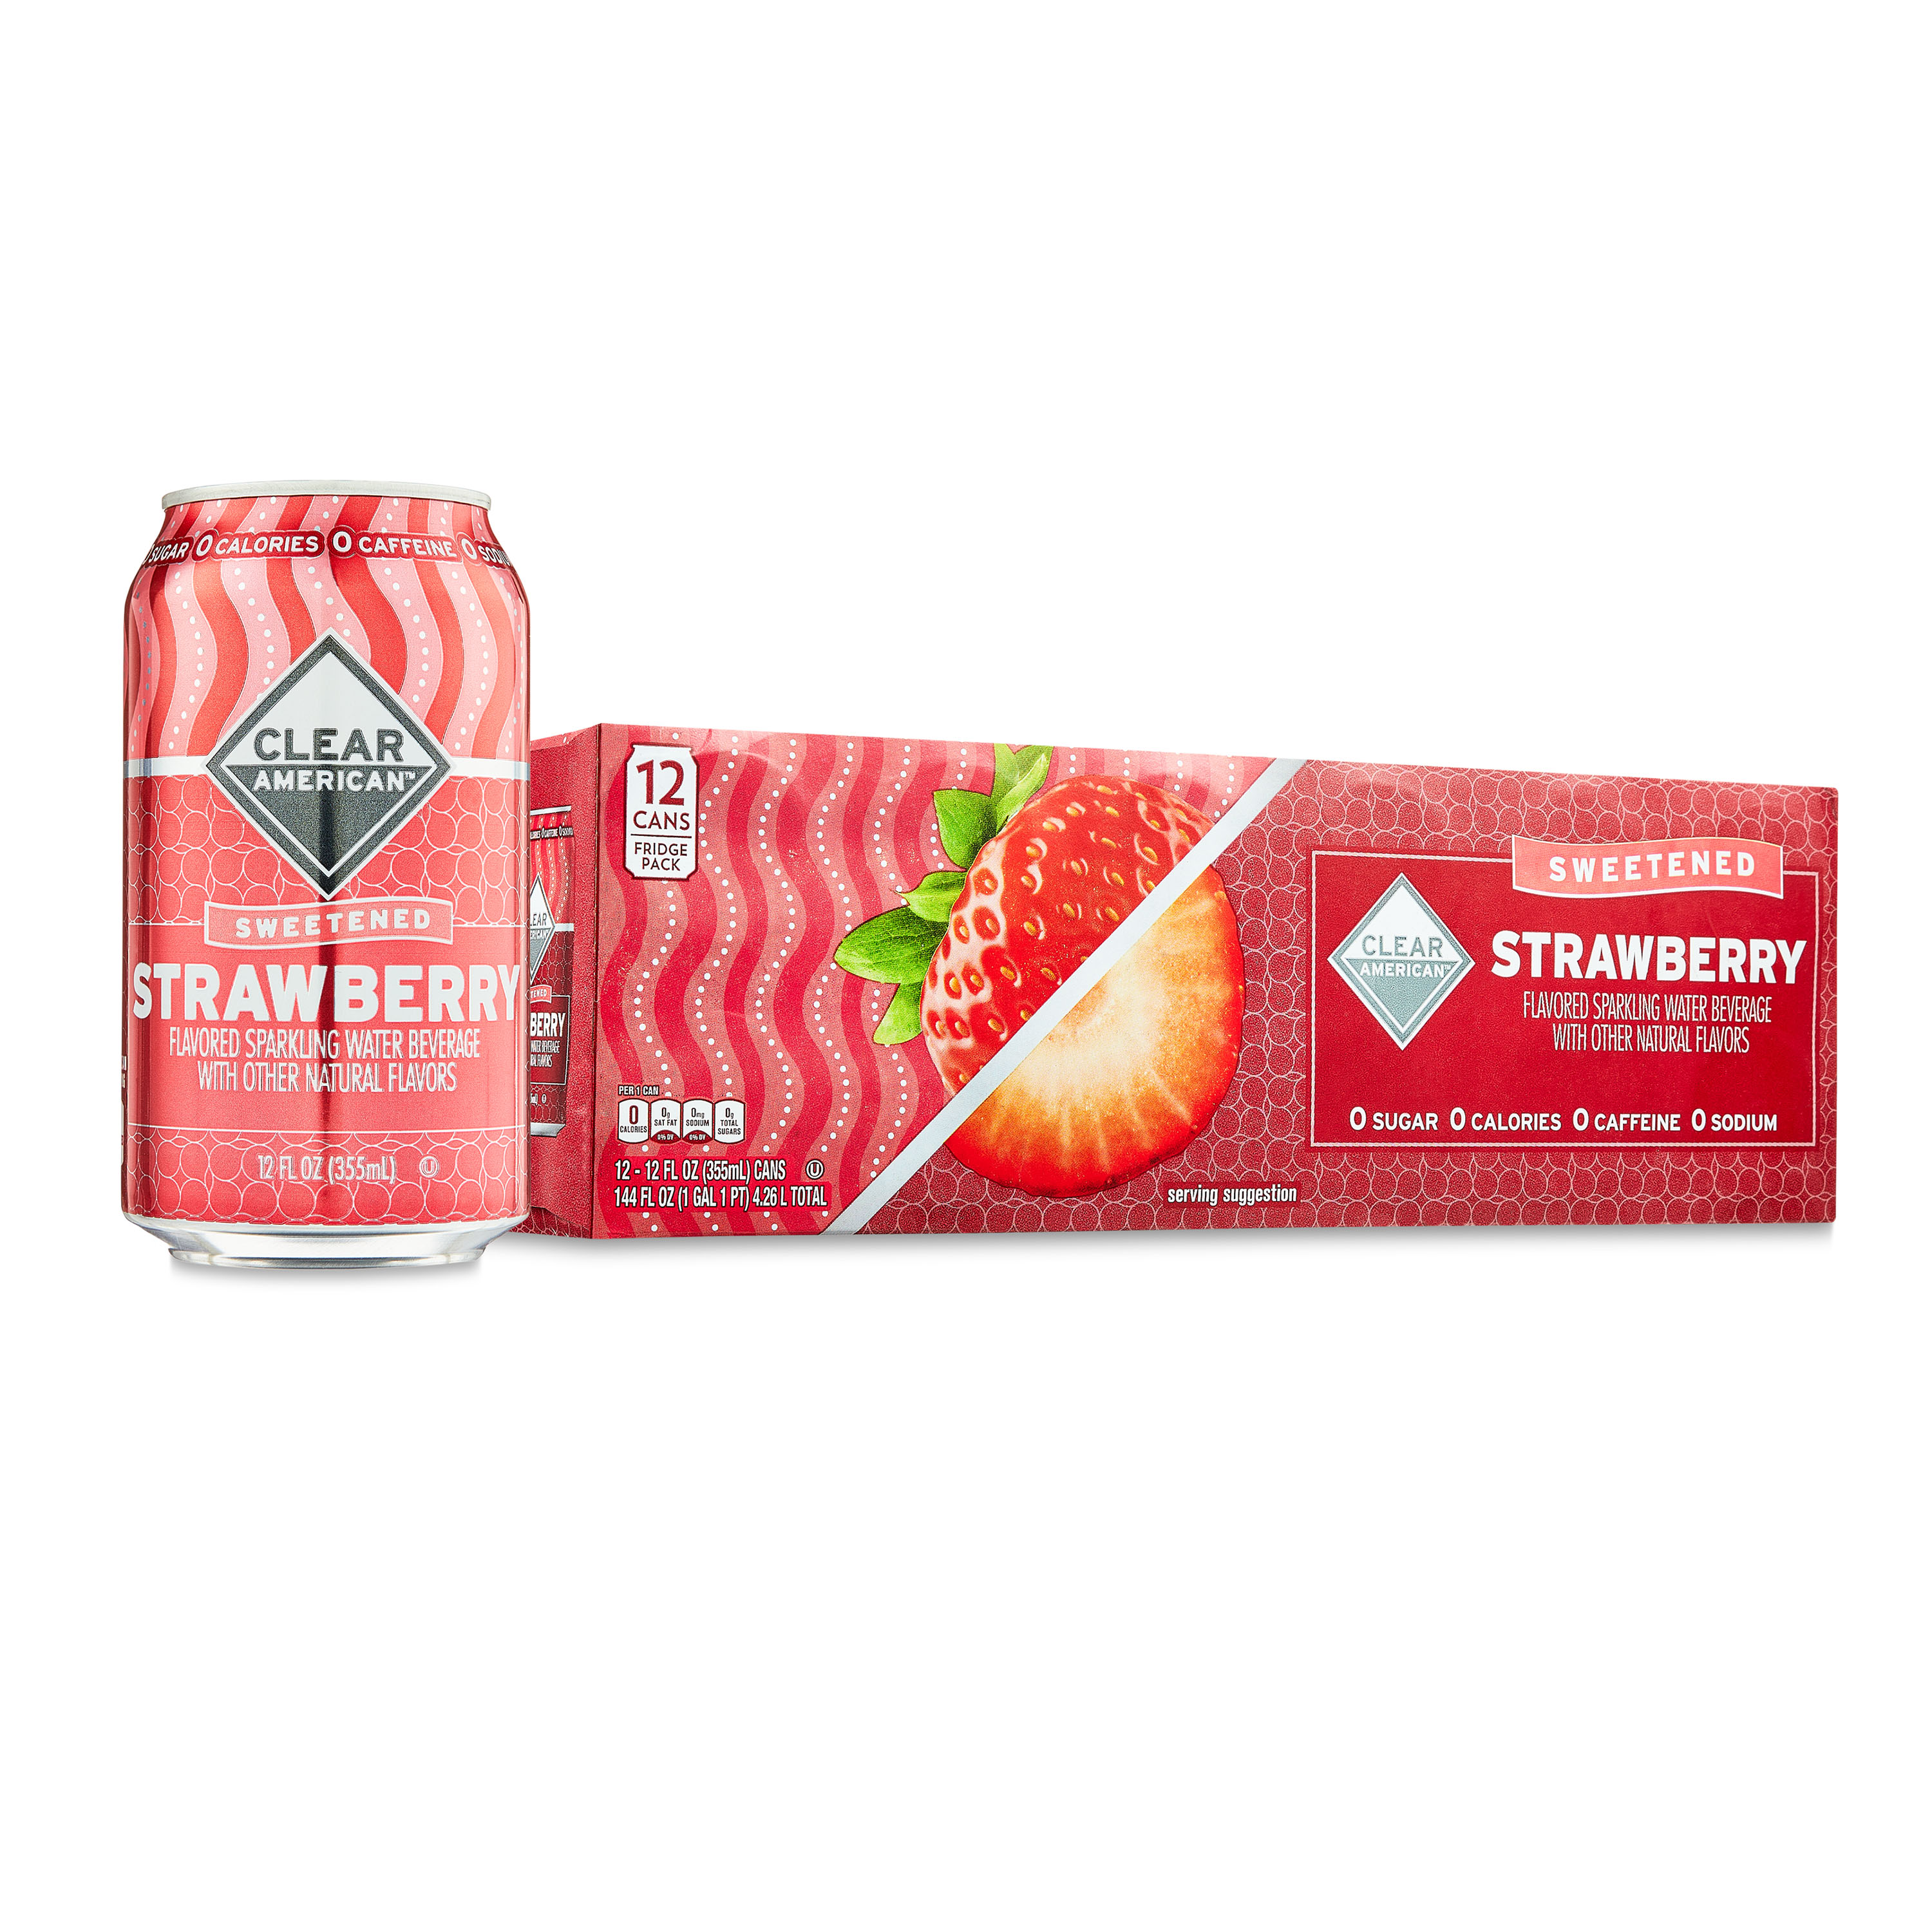 Clear American Strawberry Sparkling Water, 12 fl oz, 12 Count - image 1 of 10